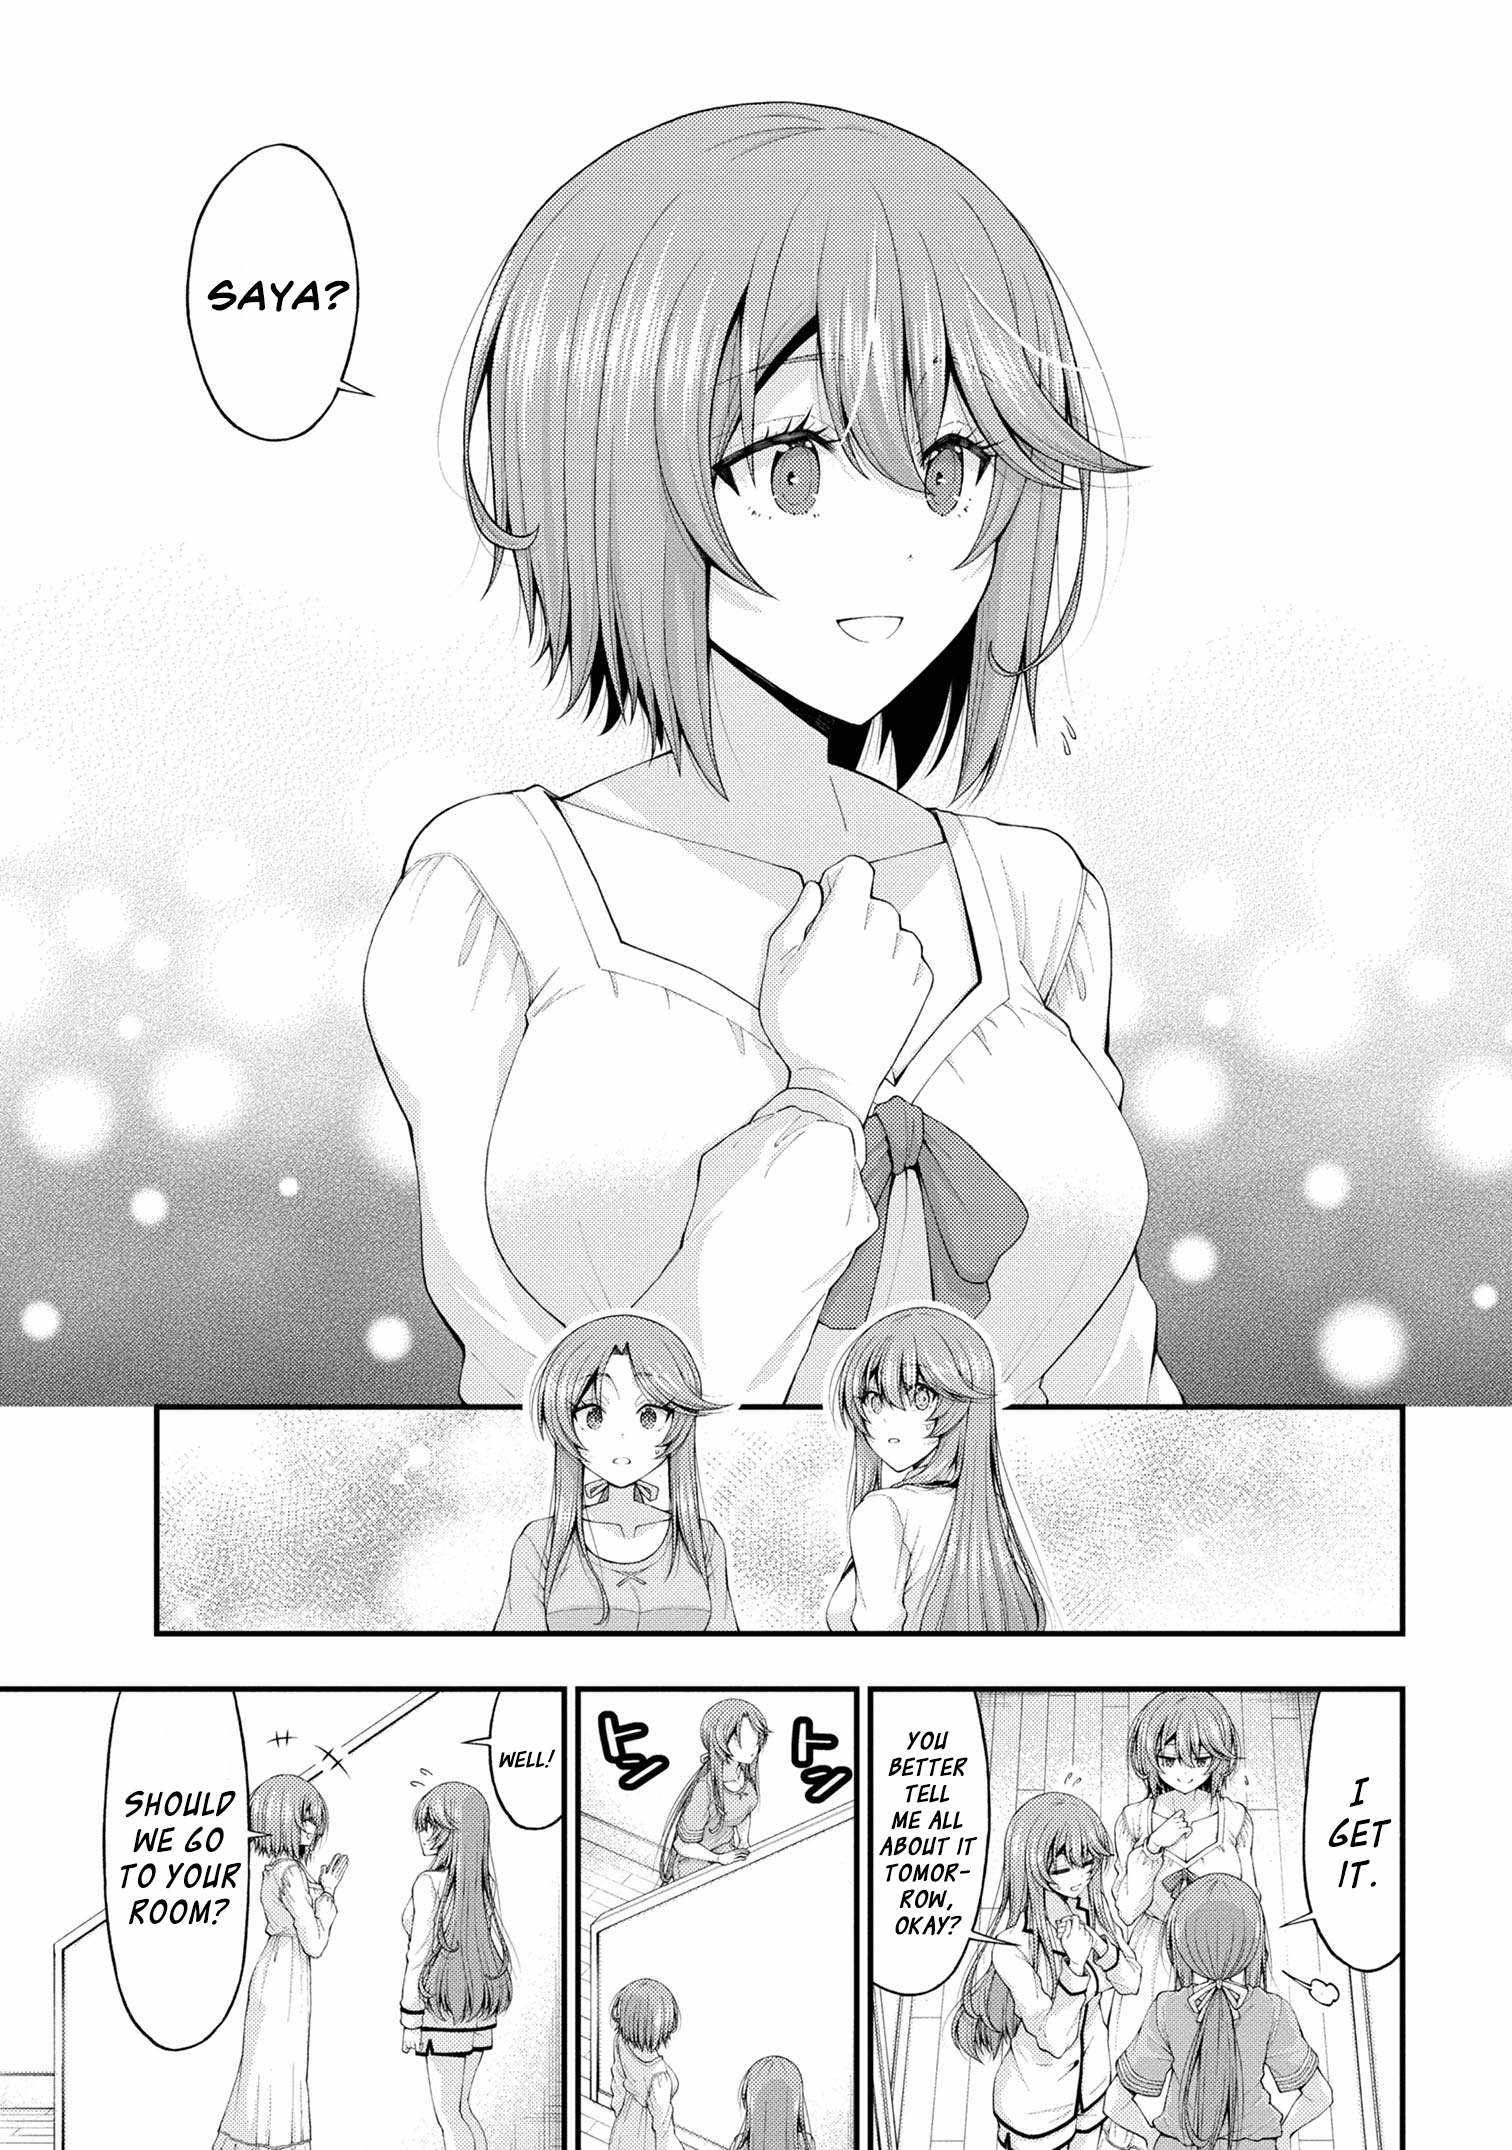 The Gal Who Was Meant to Confess to Me as a Game Punishment Has Apparently Fallen in Love with Me Chapter 12-5-eng-li - Page 10